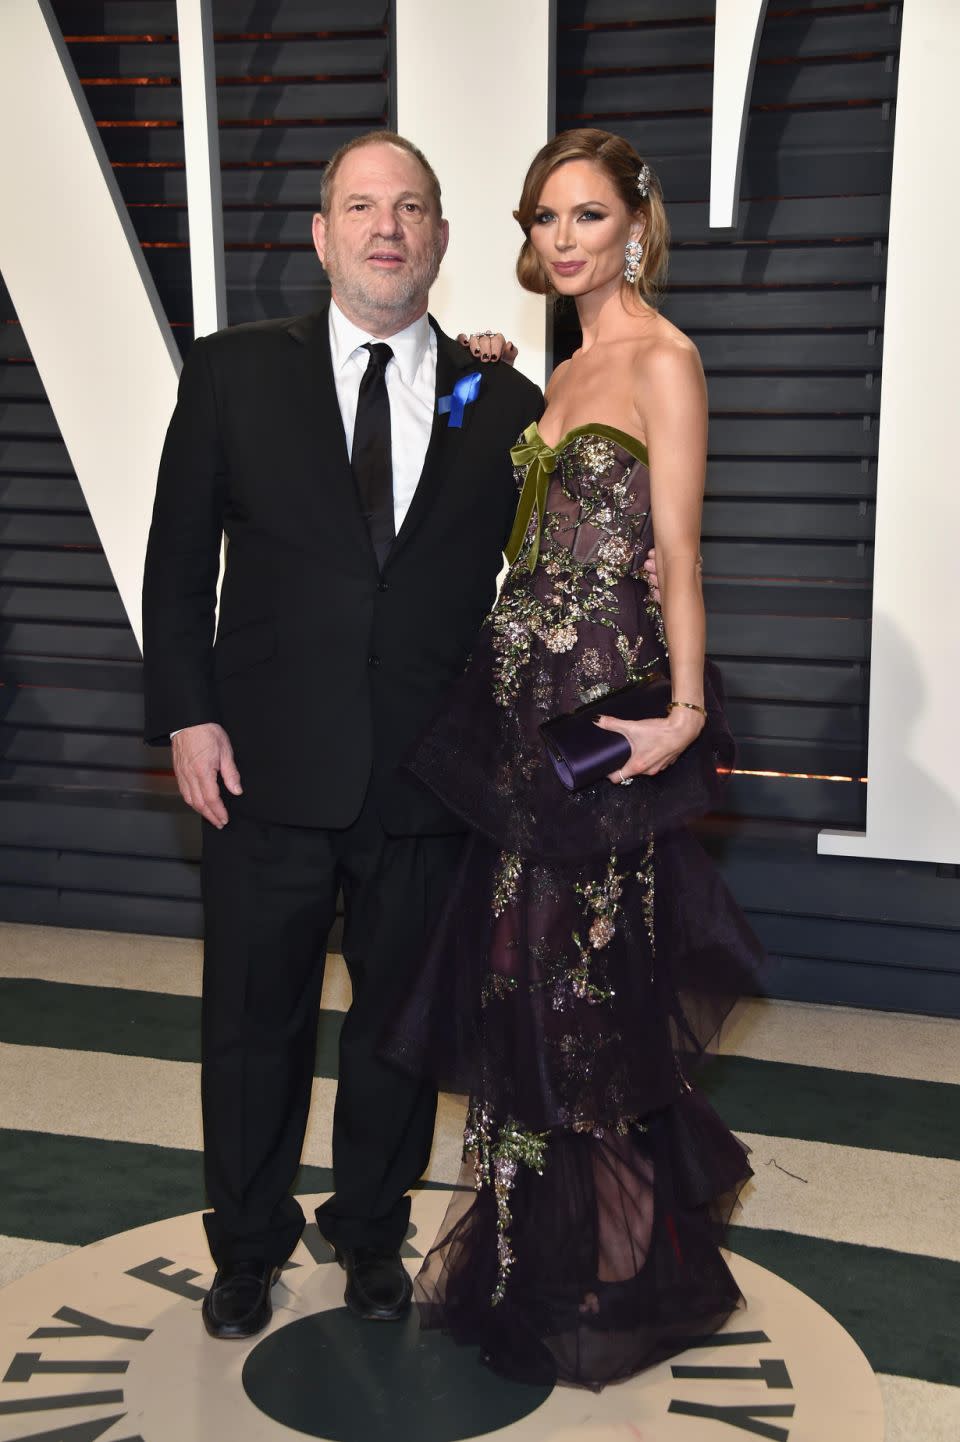 Georgina announced she was leaving Weinstein in October last year following the slew of sexual harassment and assault allegations made against him. The couple are here together at the 2017 Oscars Vanity Fair party. Source: Getty